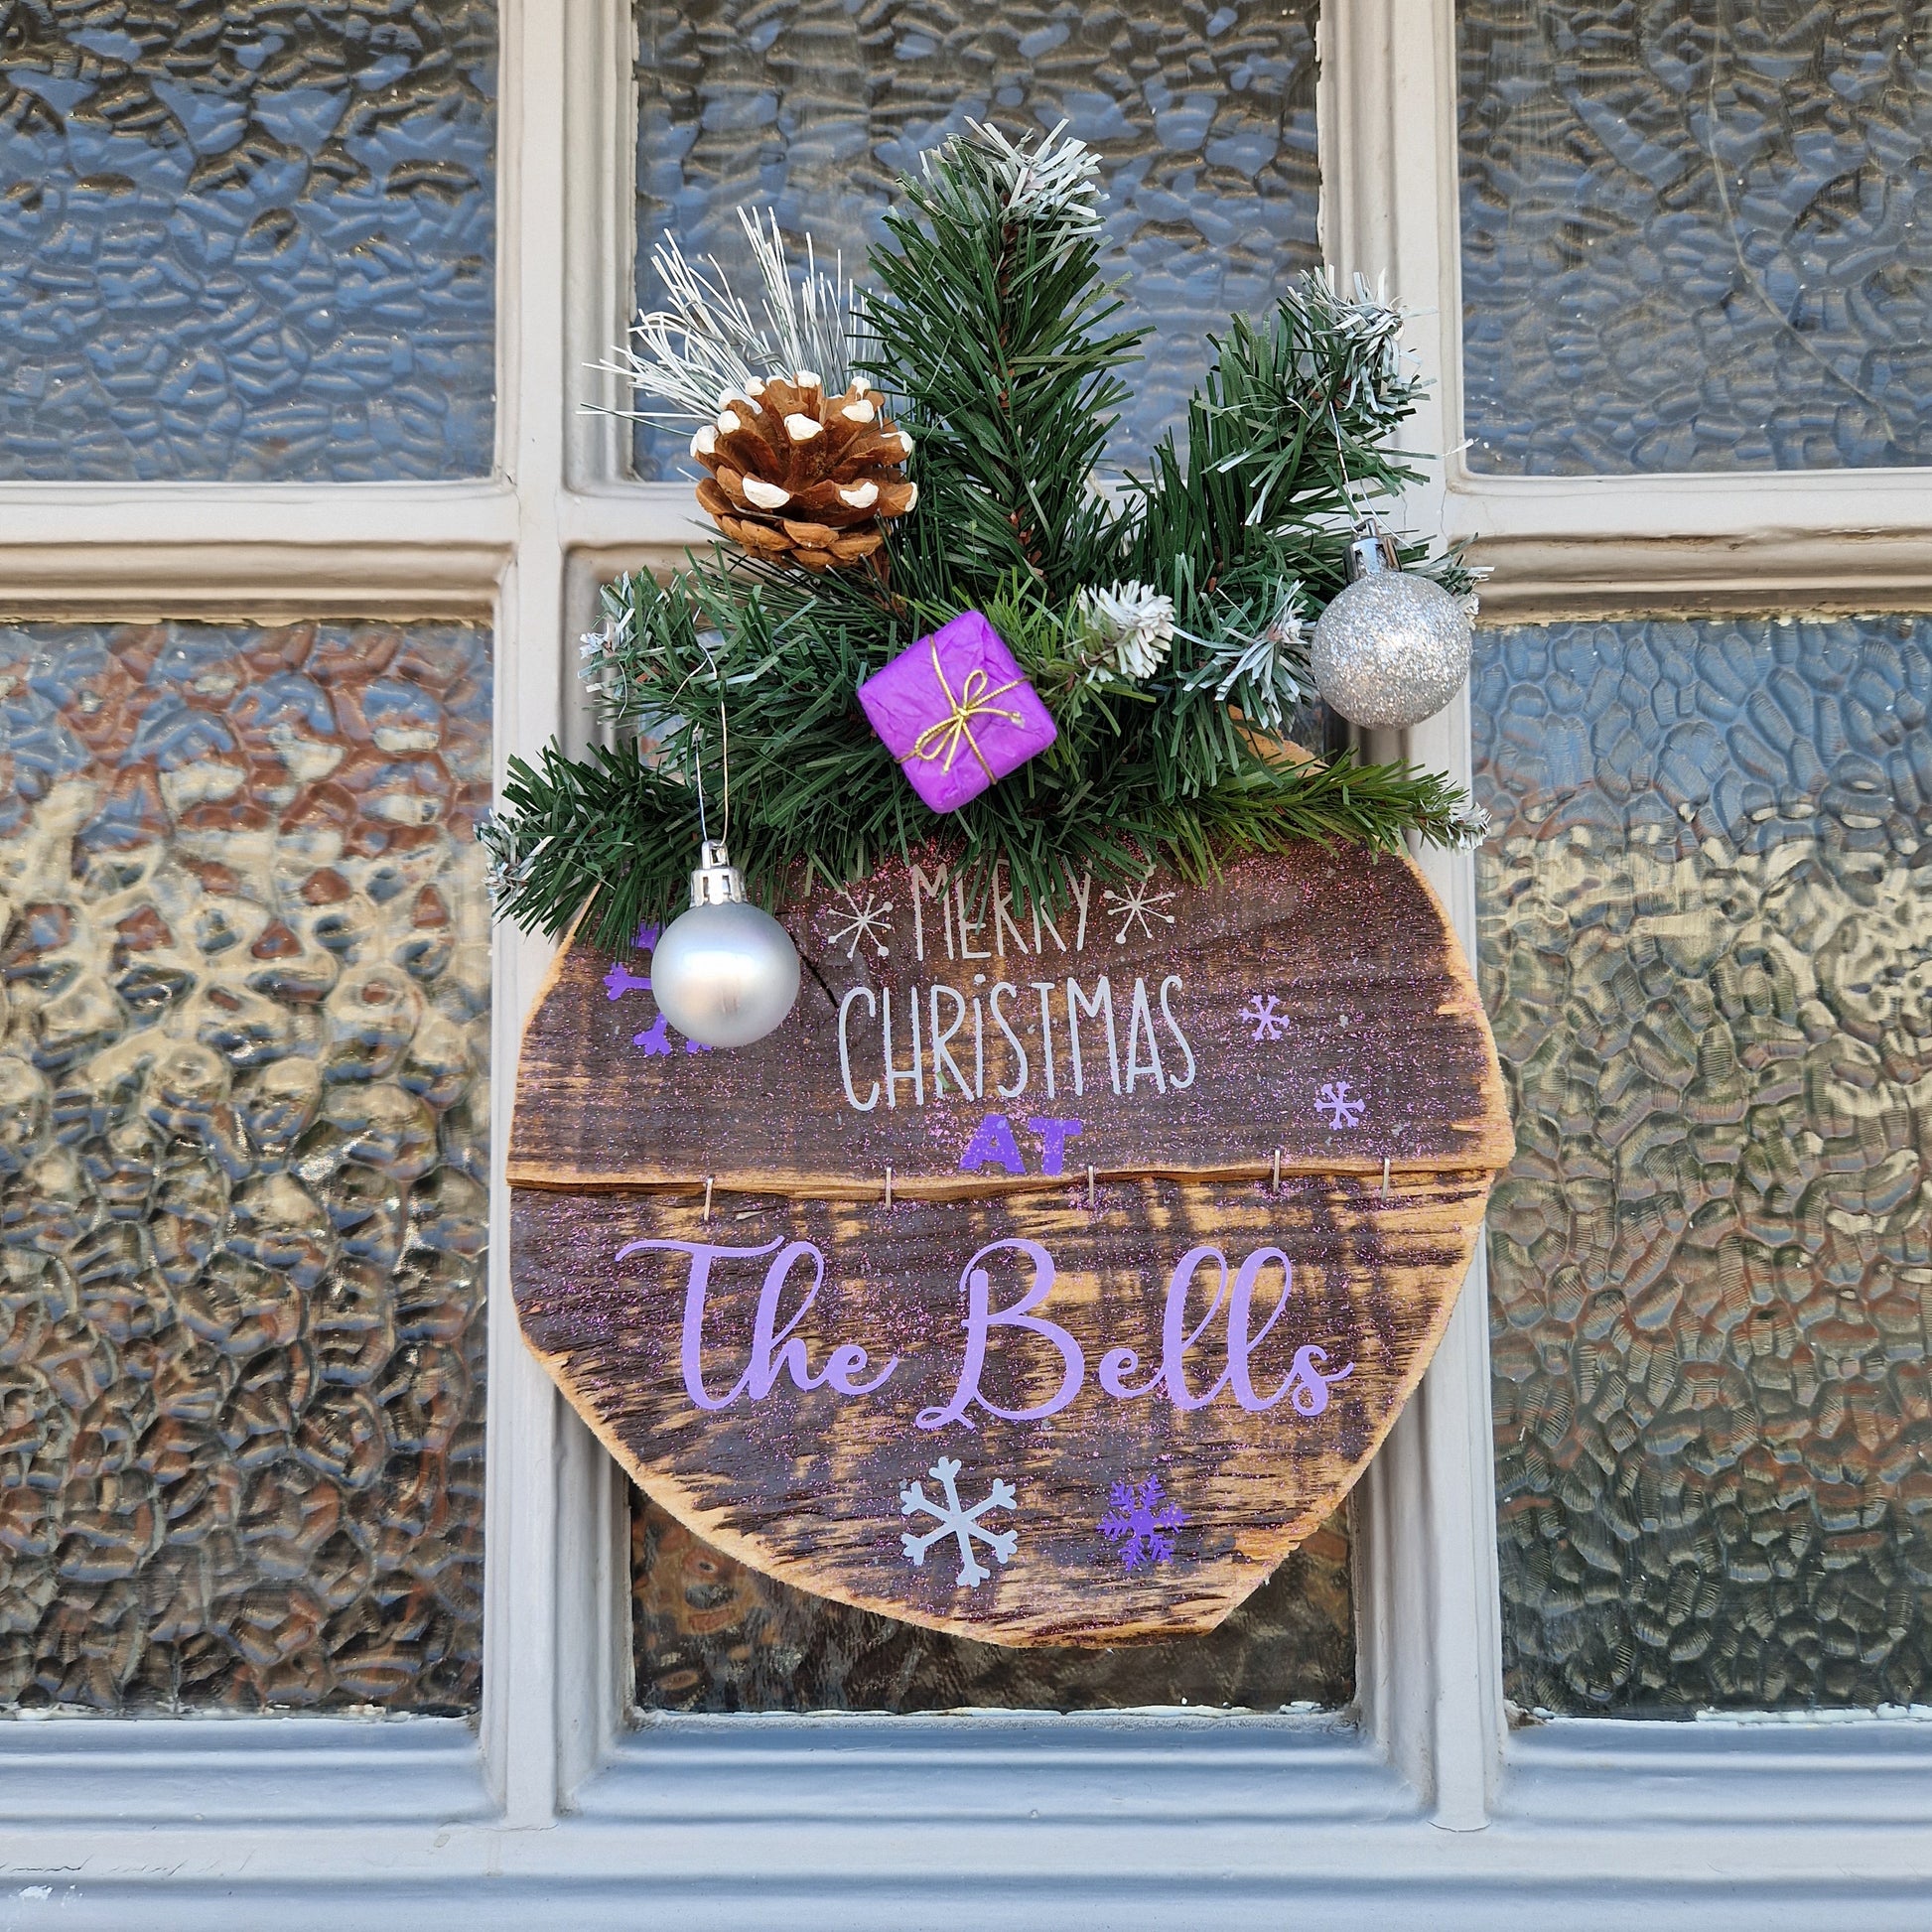 Merry Christmas at rustic wooden sign in purple